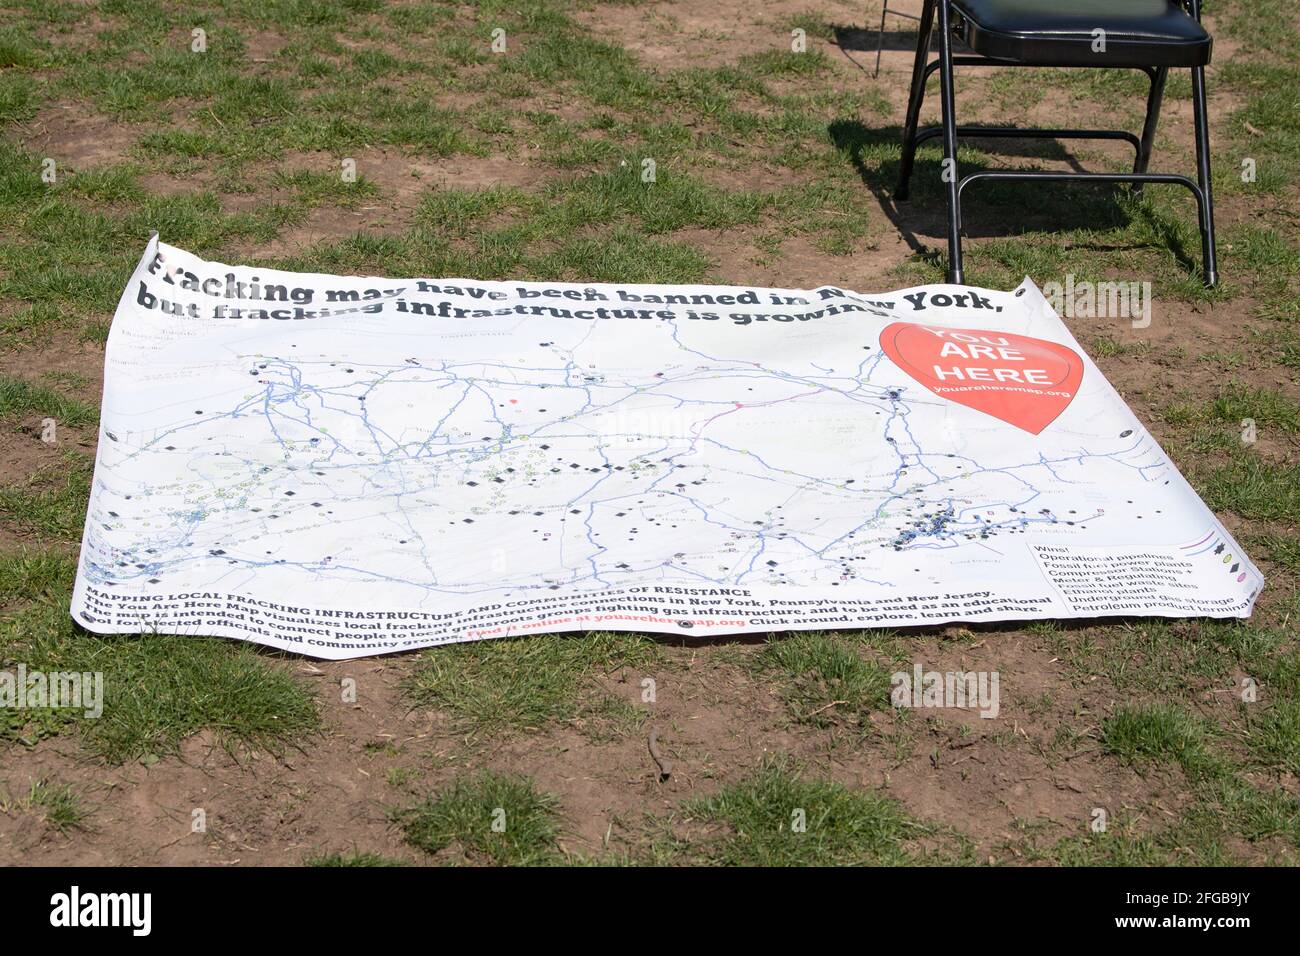 A Banner showing fracking infrastructure during an Earth Day Celebration in Astoria Park of the Queens borough of New York City.Congresswoman Ocasio-Cortez joined by New York State Senator Jessica Ramos and New York Assembly Member Zohran Mamdani for remarks about the NRG Energy, Inc proposal for the Astoria power plant. The Congresswoman opposes NRG's effort to replace their 50-year old turbine at the Astoria 'peaker' plant with a generator that burns fossil fuels extracted by fracking. (Photo by Ron Adar/SOPA Images/Sipa USA) Stock Photo